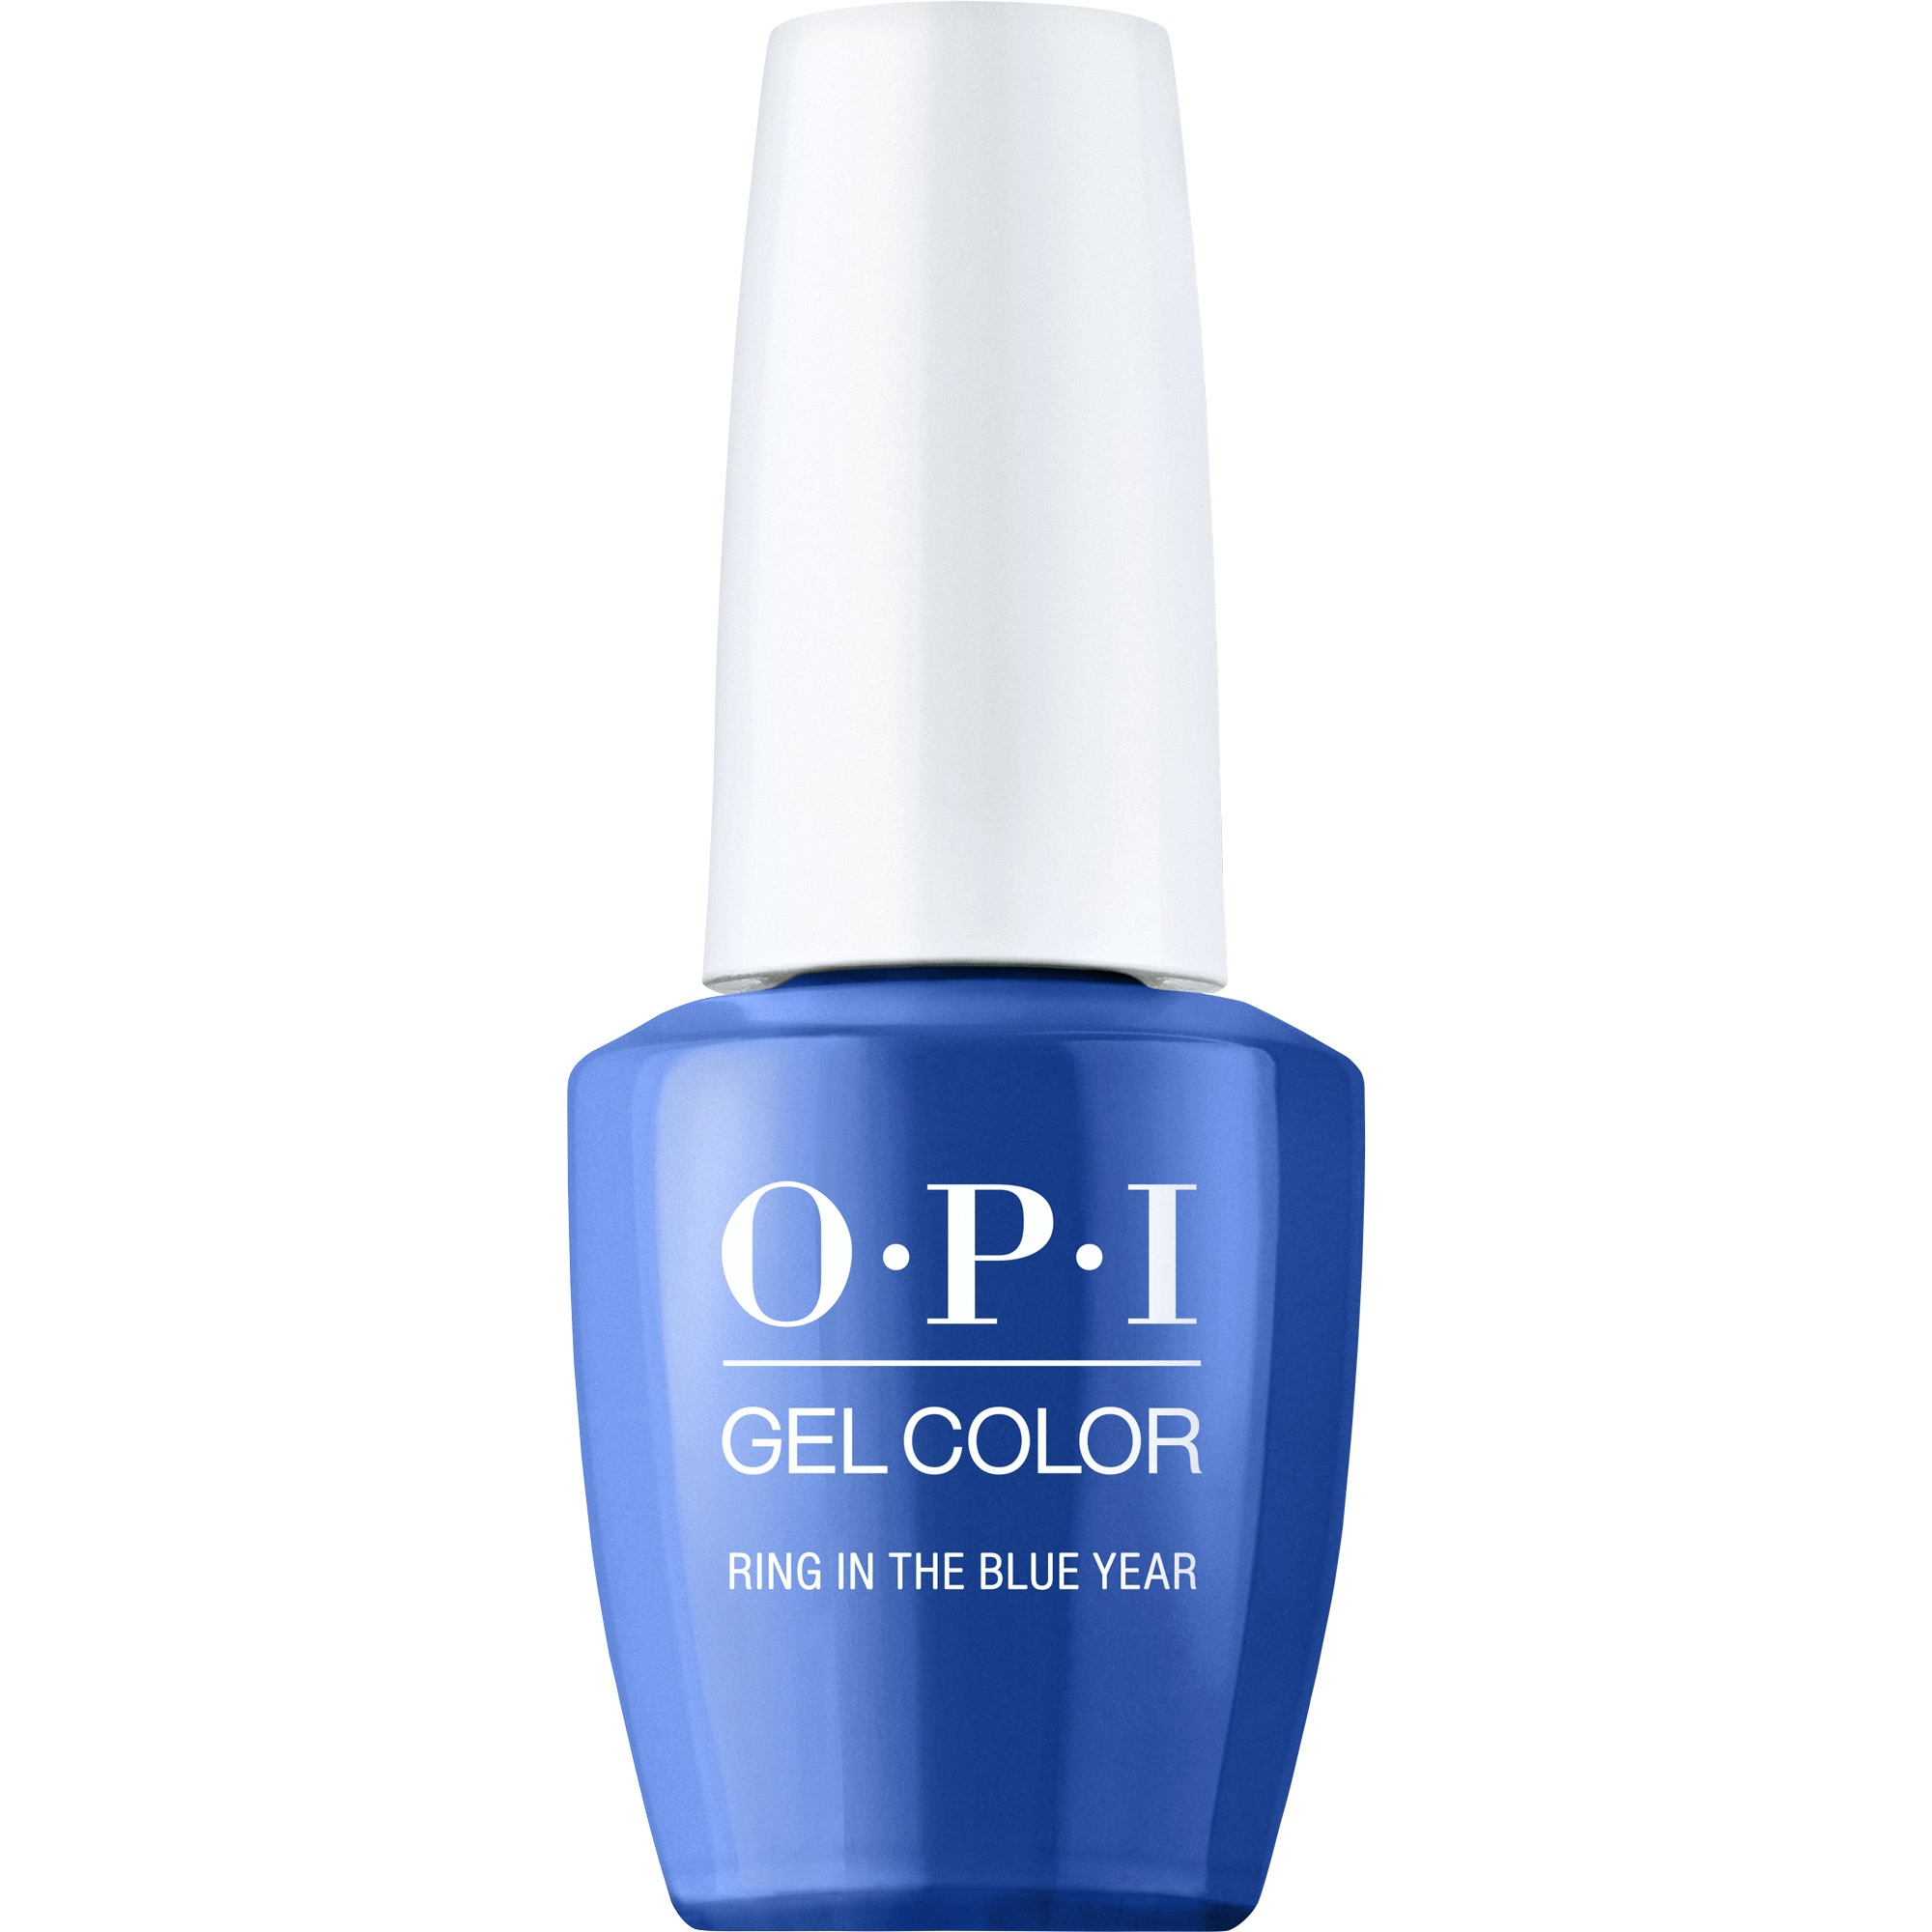 OPI Gel Color 360 - Ring in the Blue Year